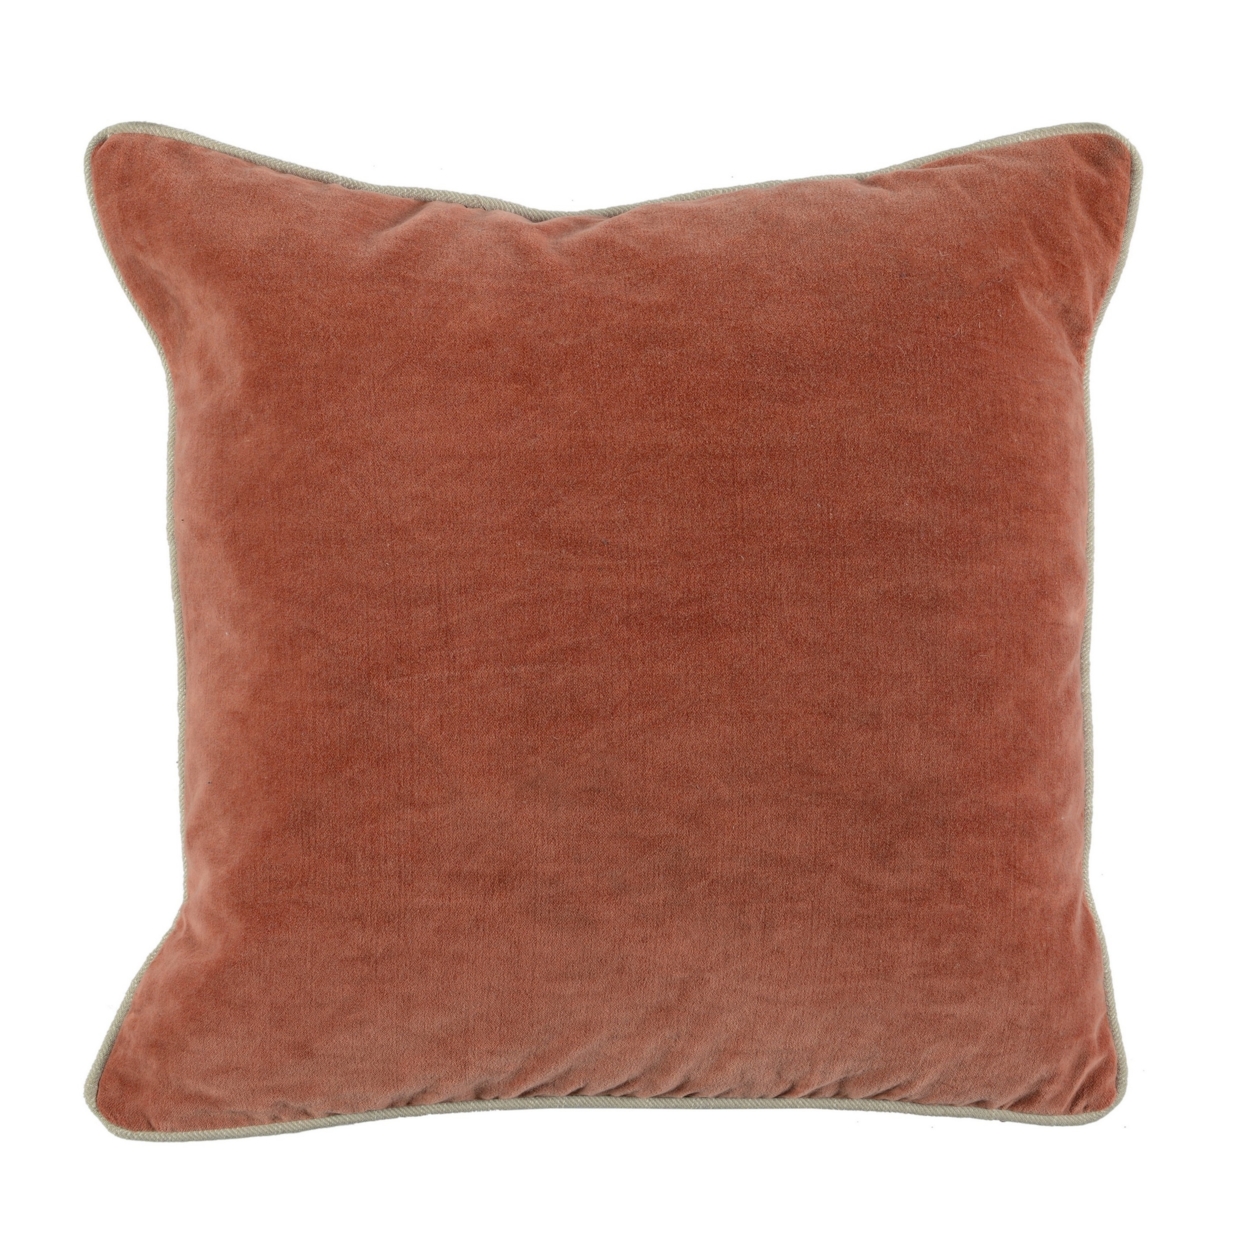 Square Fabric Throw Pillow With Solid Color And Piped Edges, Pink- Saltoro Sherpi